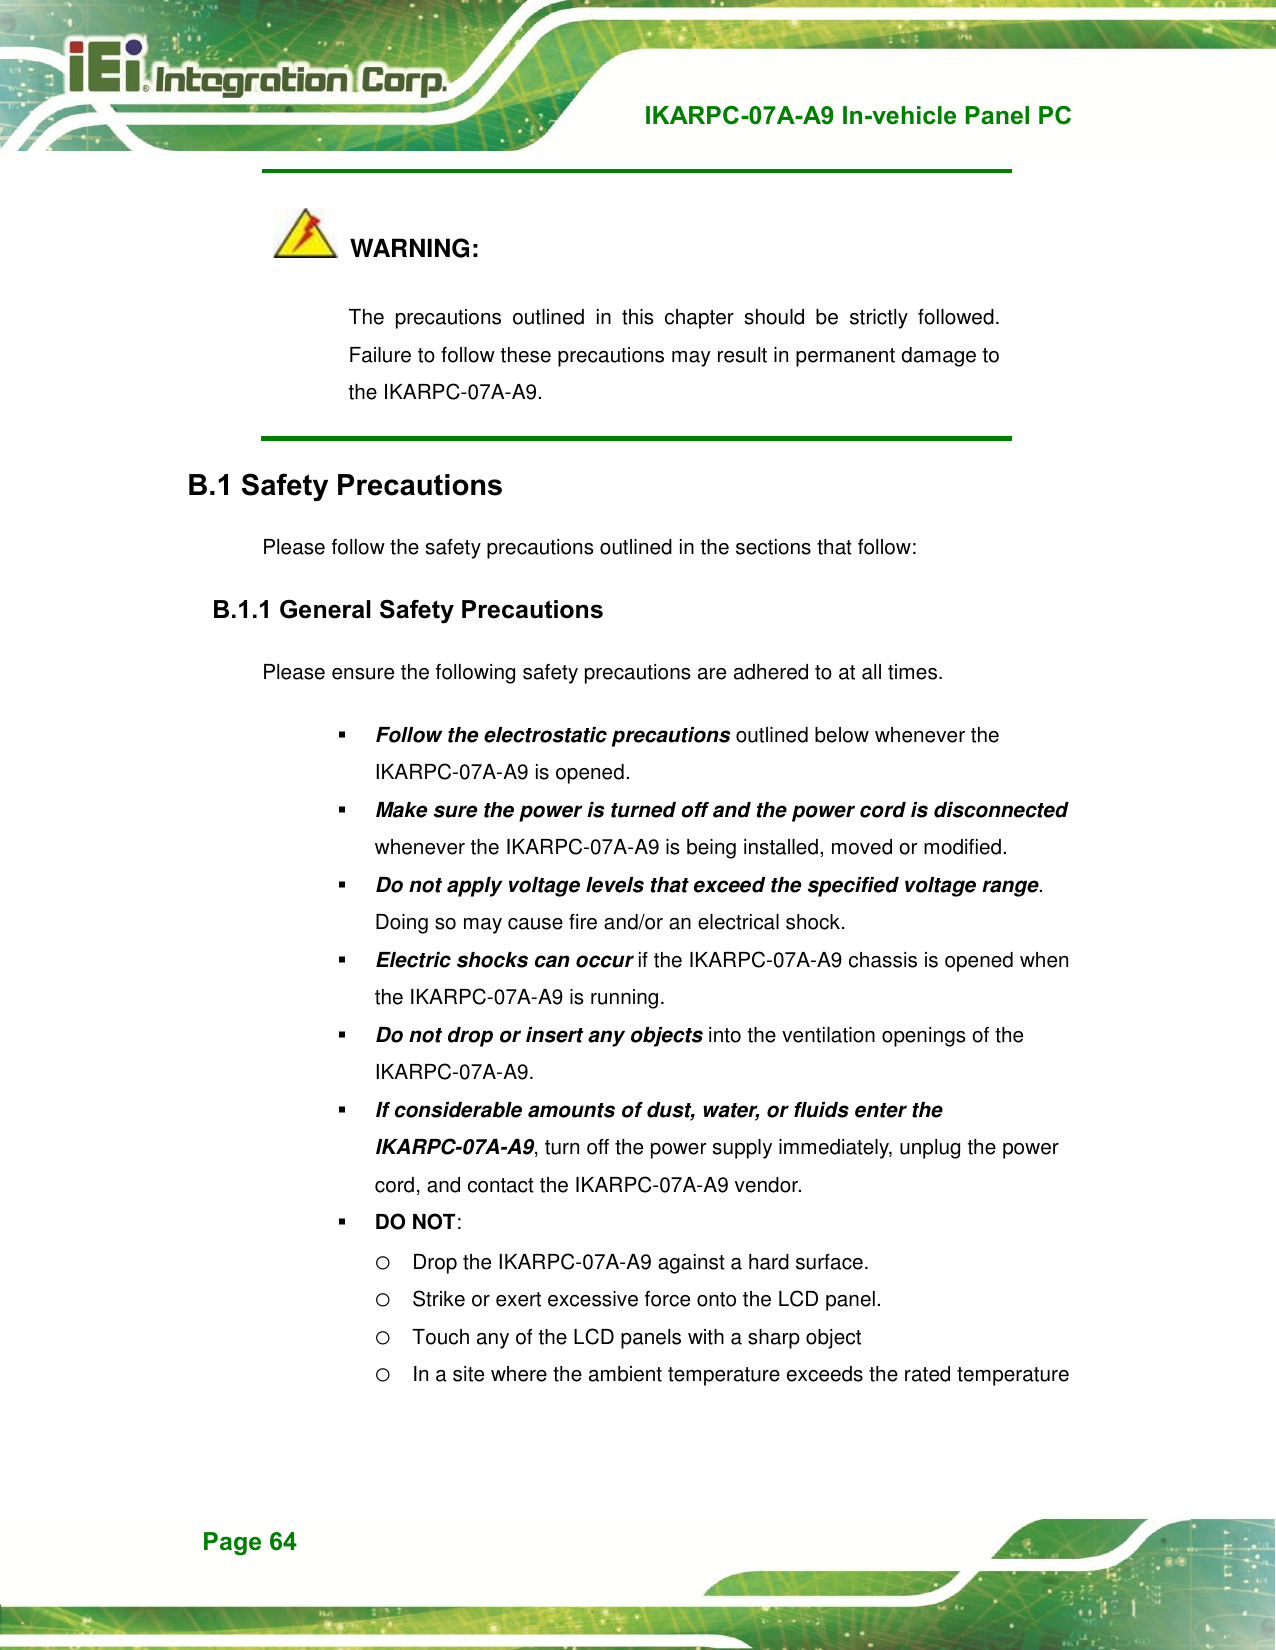   IKARPC-07A-A9 In-vehicle Panel PC  Page 64   WARNING: The  precautions  outlined  in  this  chapter  should  be  strictly  followed. Failure to follow these precautions may result in permanent damage to the IKARPC-07A-A9. B.1 Safety Precautions Please follow the safety precautions outlined in the sections that follow: B.1.1 General Safety Precautions Please ensure the following safety precautions are adhered to at all times.  Follow the electrostatic precautions outlined below whenever the IKARPC-07A-A9 is opened.  Make sure the power is turned off and the power cord is disconnected whenever the IKARPC-07A-A9 is being installed, moved or modified.    Do not apply voltage levels that exceed the specified voltage range. Doing so may cause fire and/or an electrical shock.  Electric shocks can occur if the IKARPC-07A-A9 chassis is opened when the IKARPC-07A-A9 is running.    Do not drop or insert any objects into the ventilation openings of the IKARPC-07A-A9.  If considerable amounts of dust, water, or fluids enter the IKARPC-07A-A9, turn off the power supply immediately, unplug the power cord, and contact the IKARPC-07A-A9 vendor.    DO NOT:   o Drop the IKARPC-07A-A9 against a hard surface. o Strike or exert excessive force onto the LCD panel. o Touch any of the LCD panels with a sharp object o In a site where the ambient temperature exceeds the rated temperature 